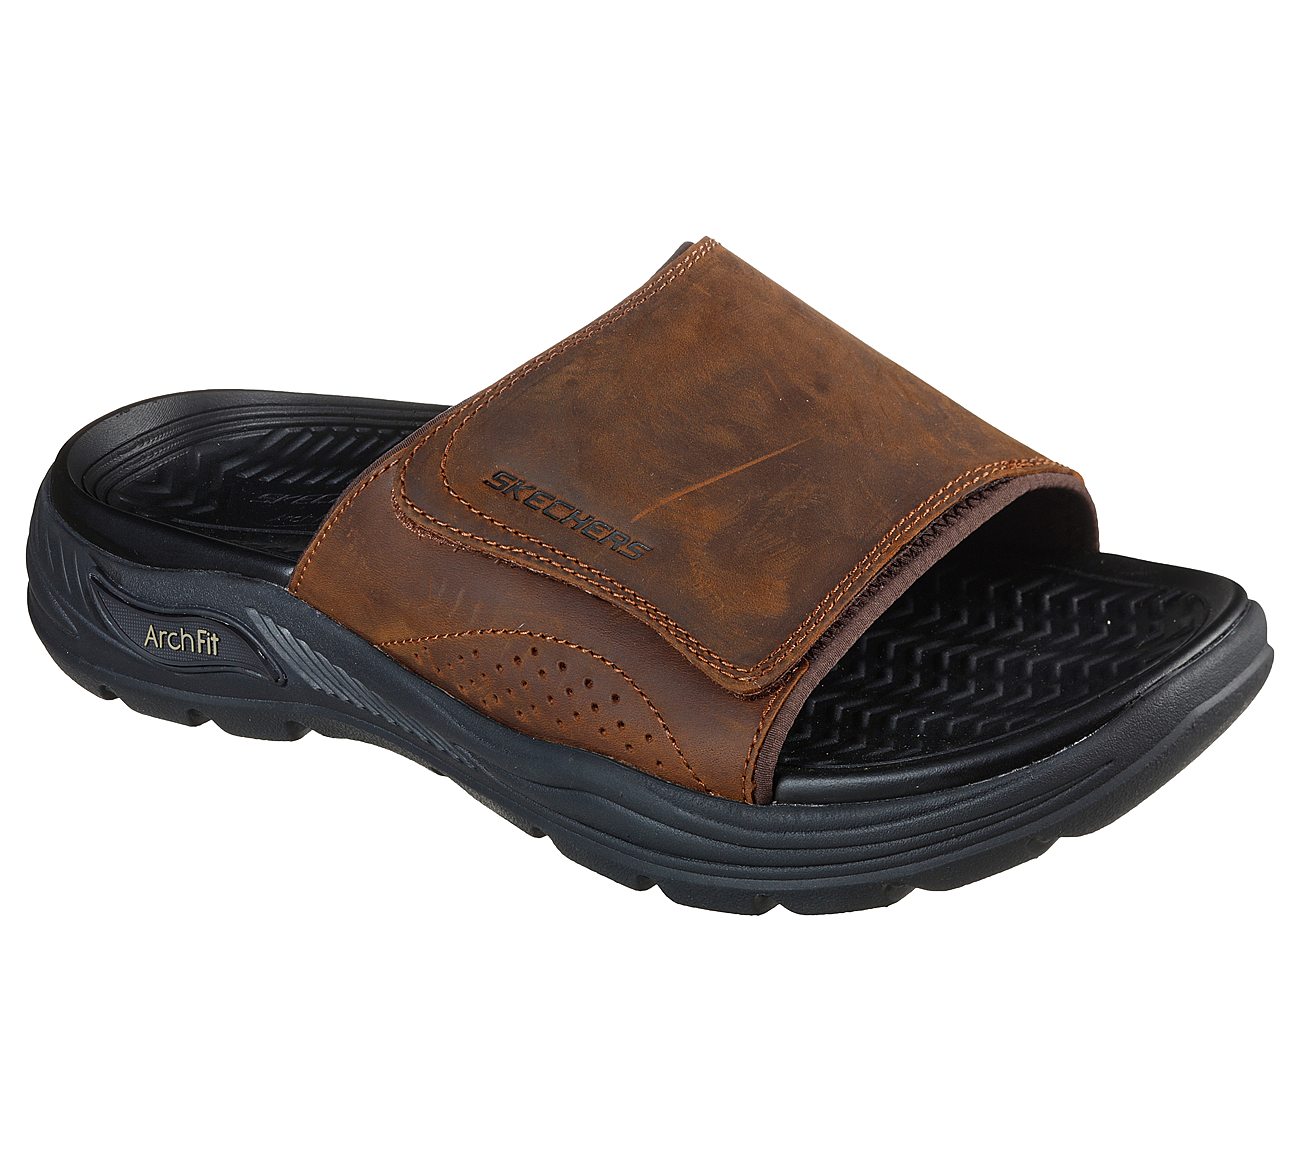 ARCH FIT MOTLEY SD - REVELO, DARK BROWN Footwear Lateral View